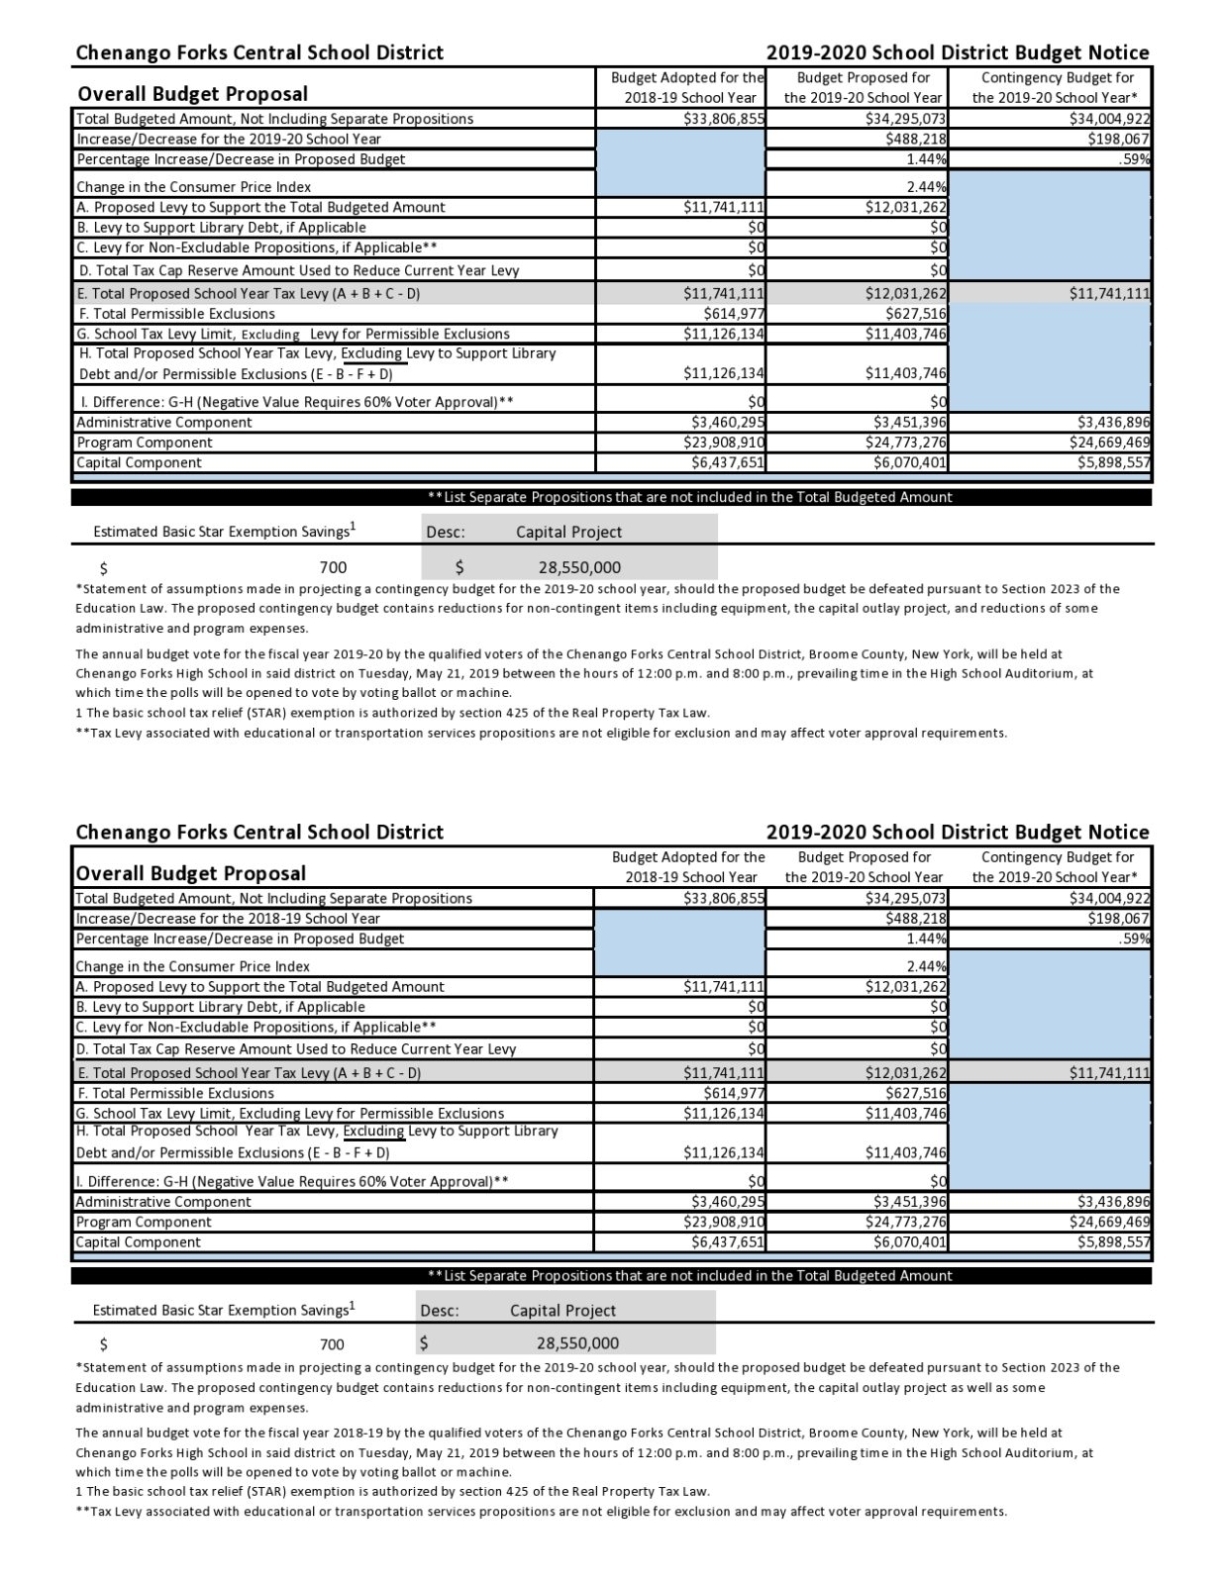 50 Free Budget Proposal Templates (Word & Excel) ᐅ Templatelab For Proposed Budget Template